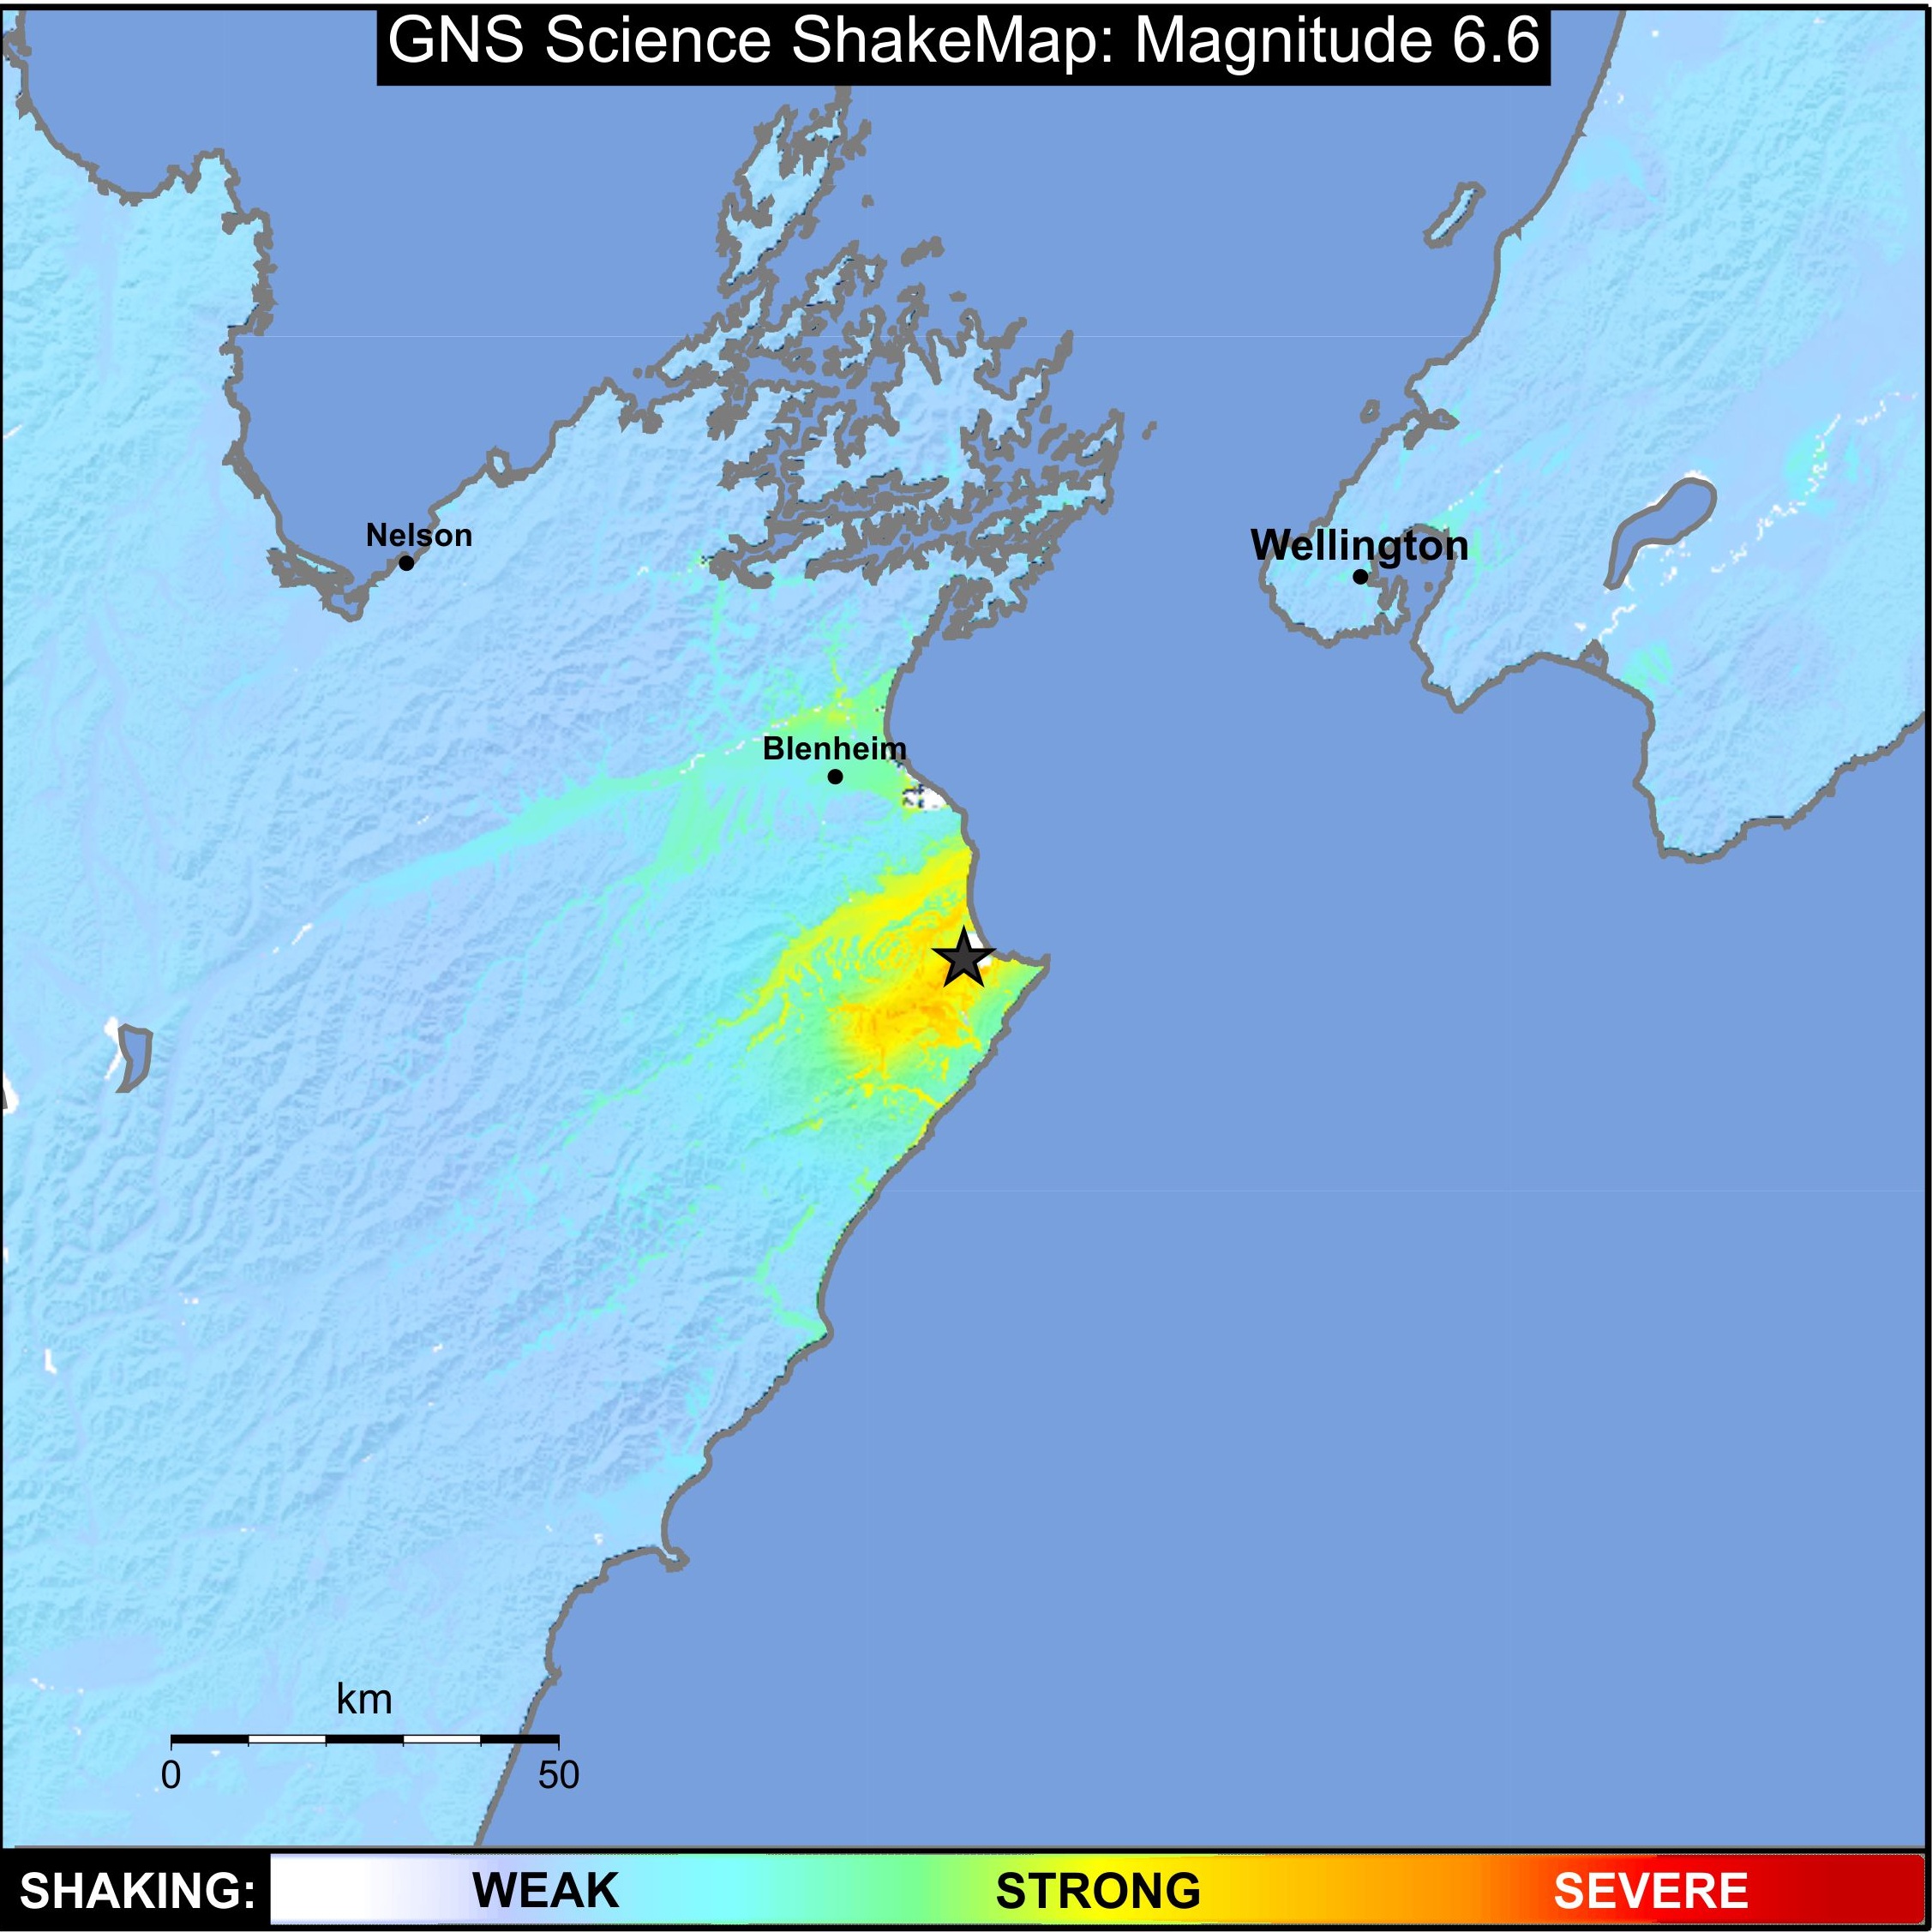 The ShakeMap showing the shaking intensity as determined by GeoNet instruments and modelled against ground conditions. (This is still in 'beta' testing and will be refined before official release.)